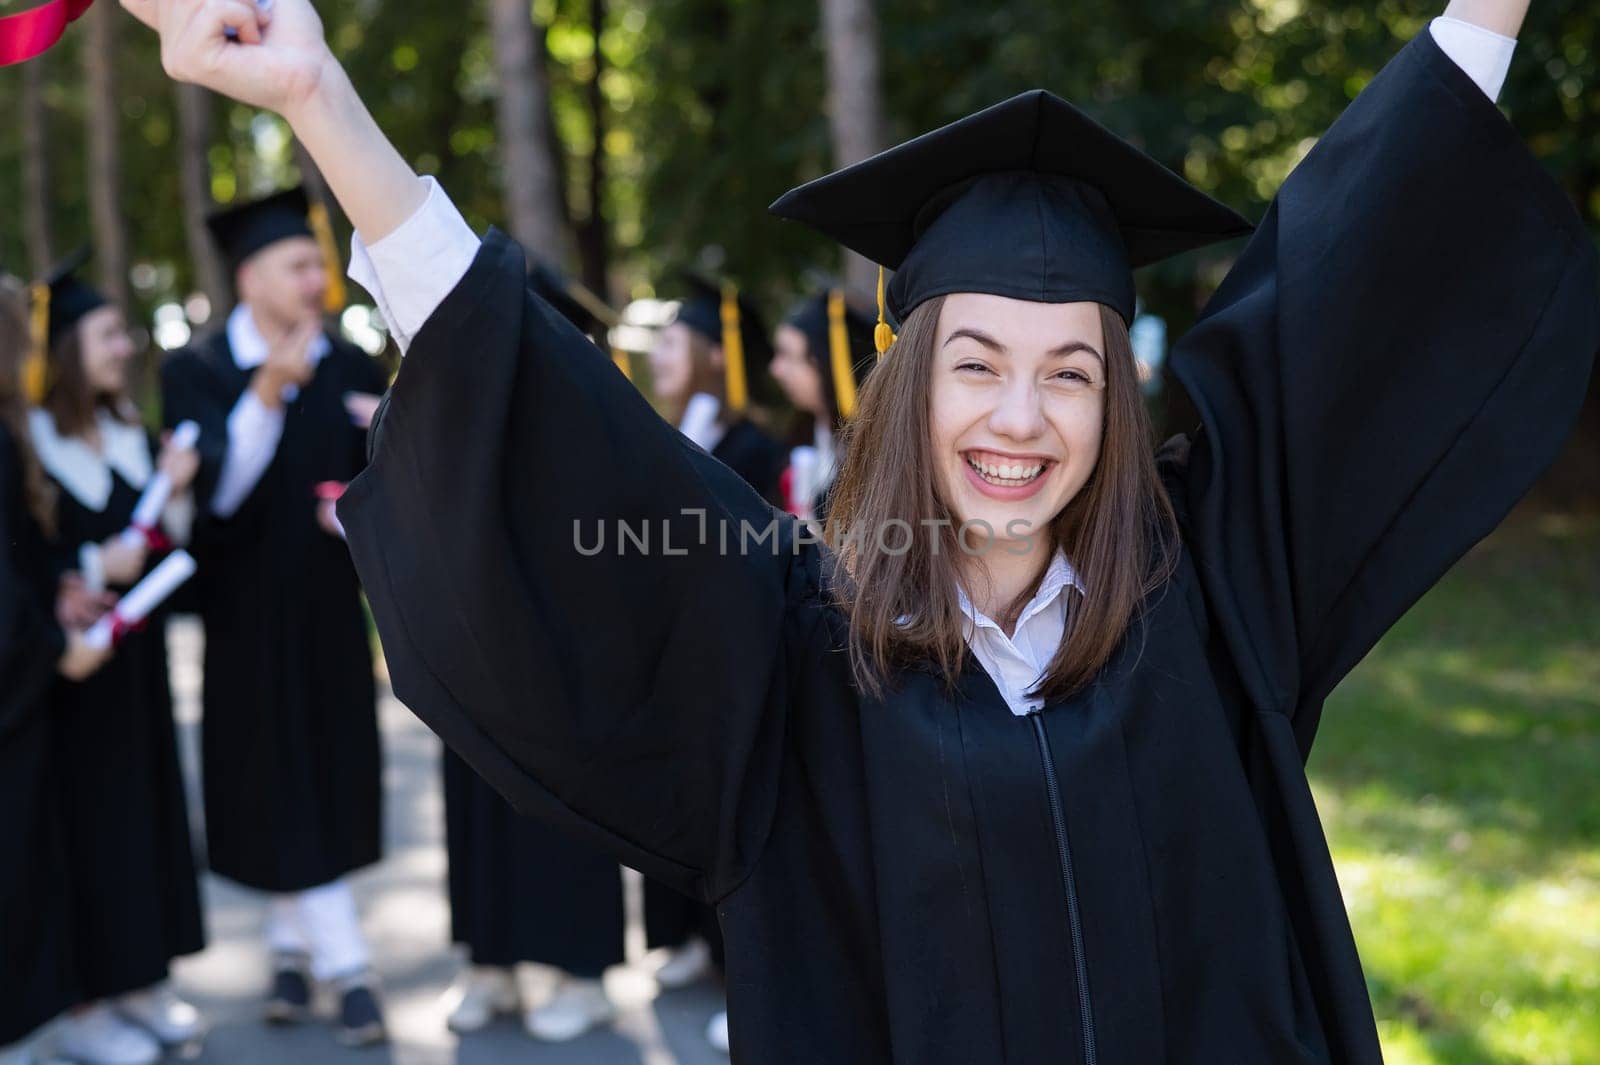 Group of happy students in graduation gowns outdoors. A young girl boasts of her diploma. by mrwed54